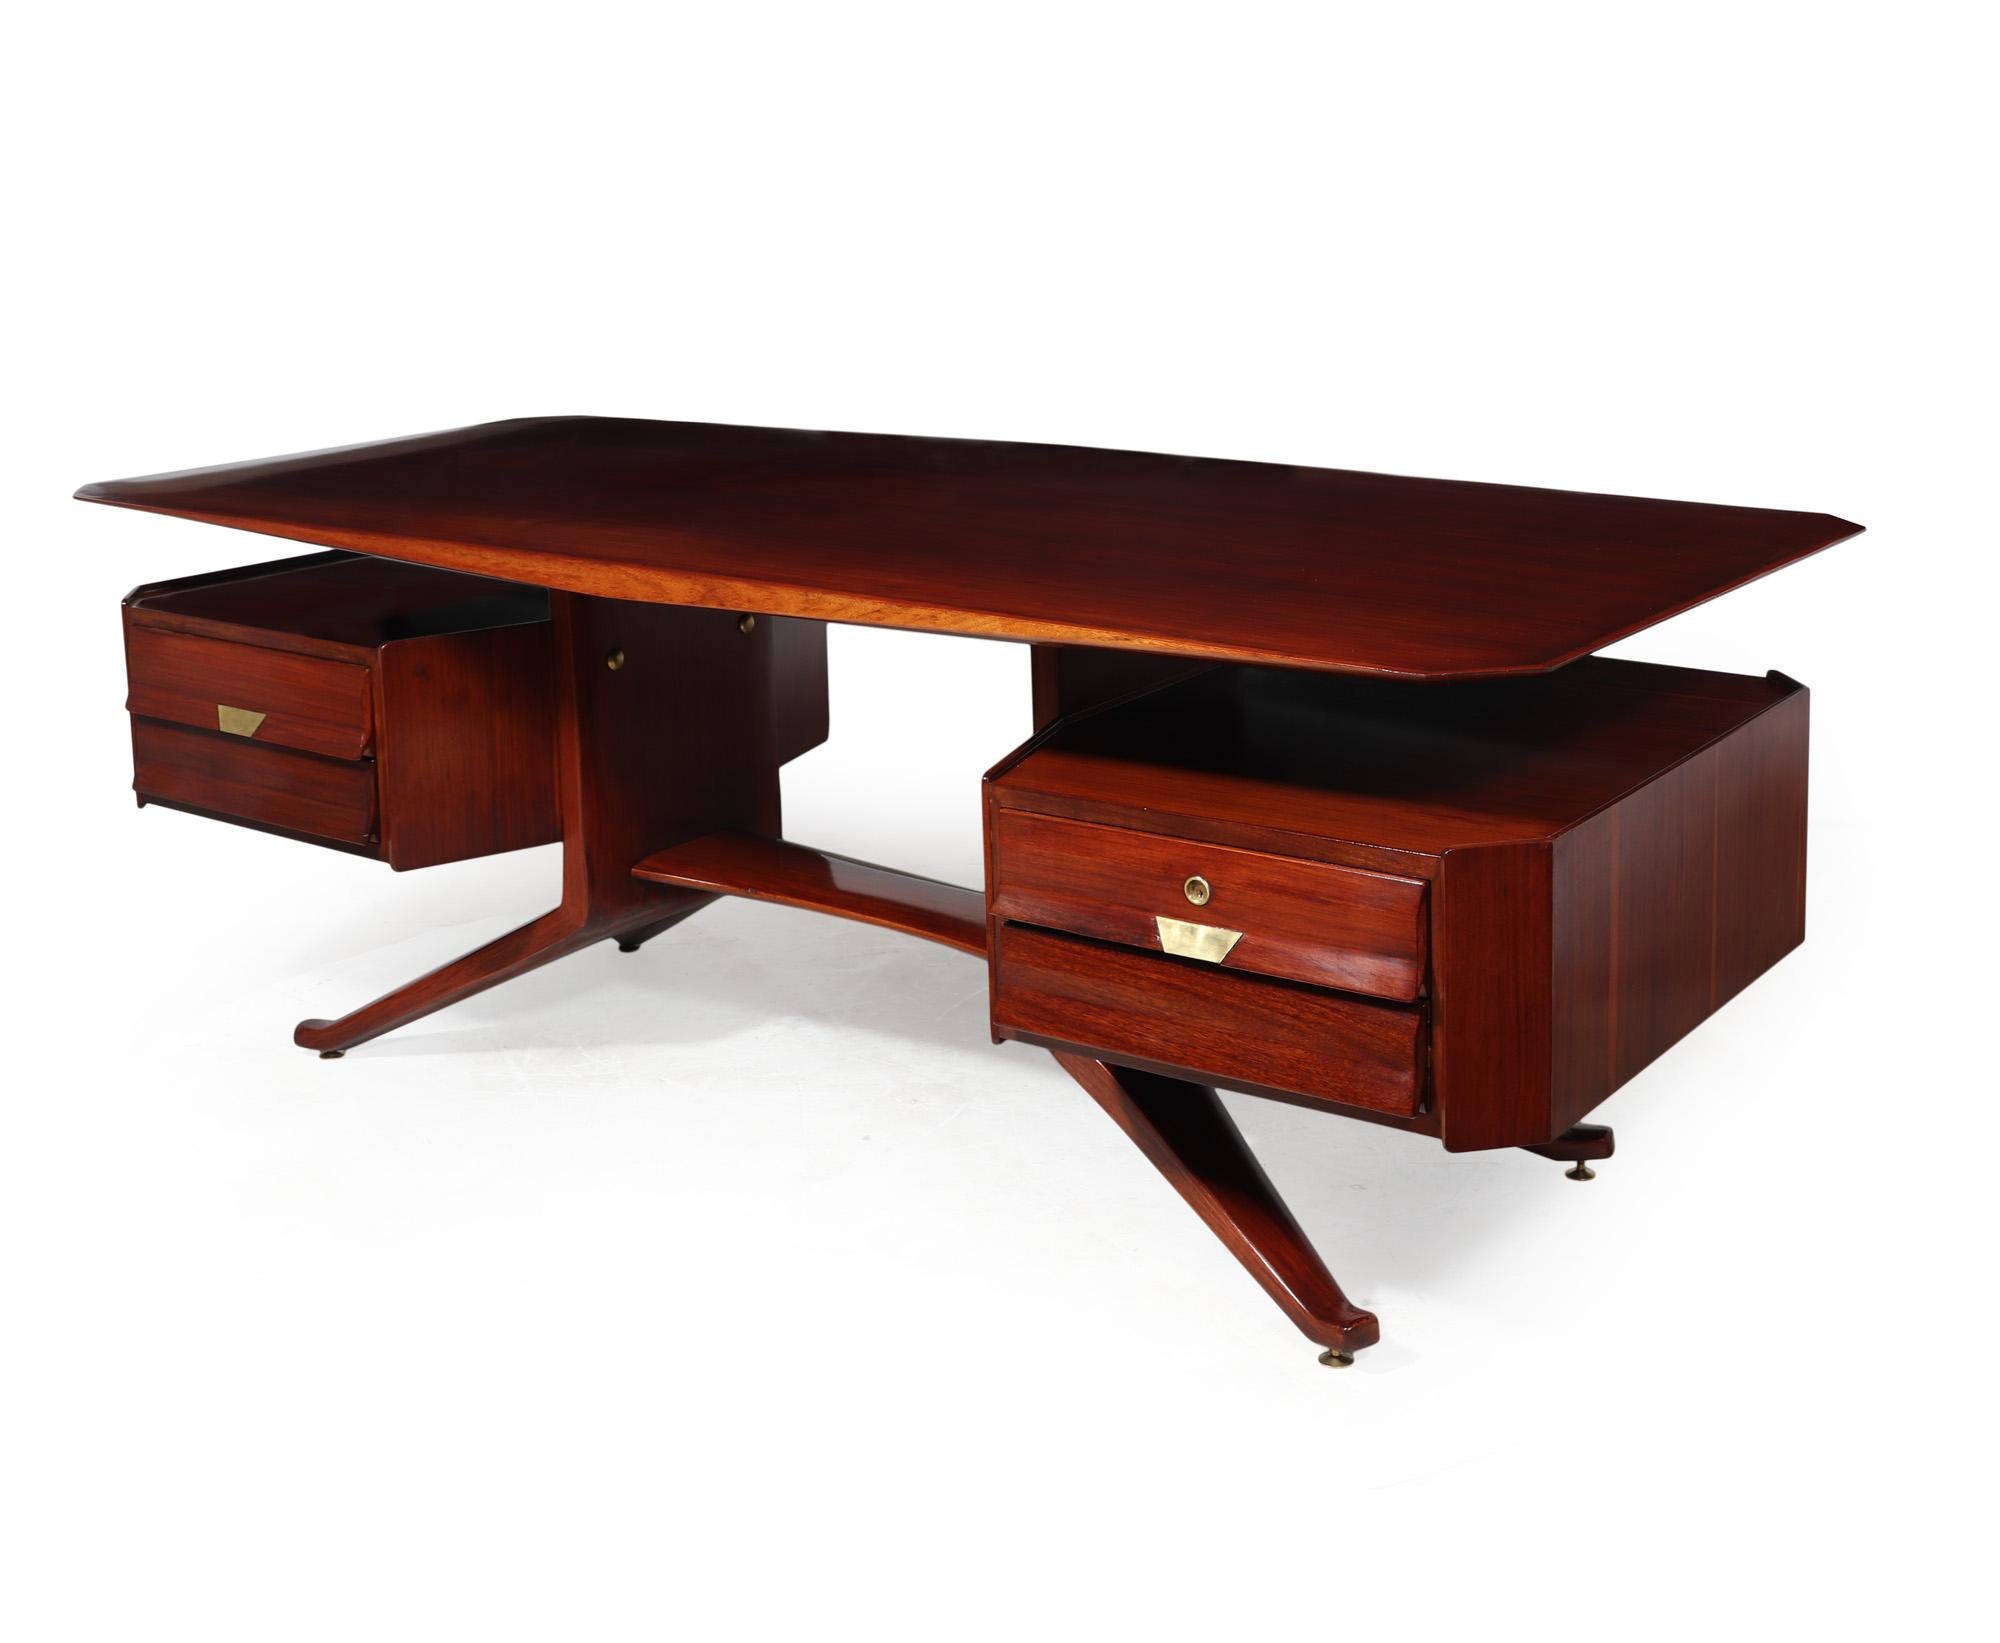 MID CENTURY DESK BY DASSI
This mid-century executive desk, crafted in Italy using cherry wood during the 1960s by Vittorio Dassi, exudes a stunning and timeless design. Featuring a unique floating pedestal with a chamfered top that gives the